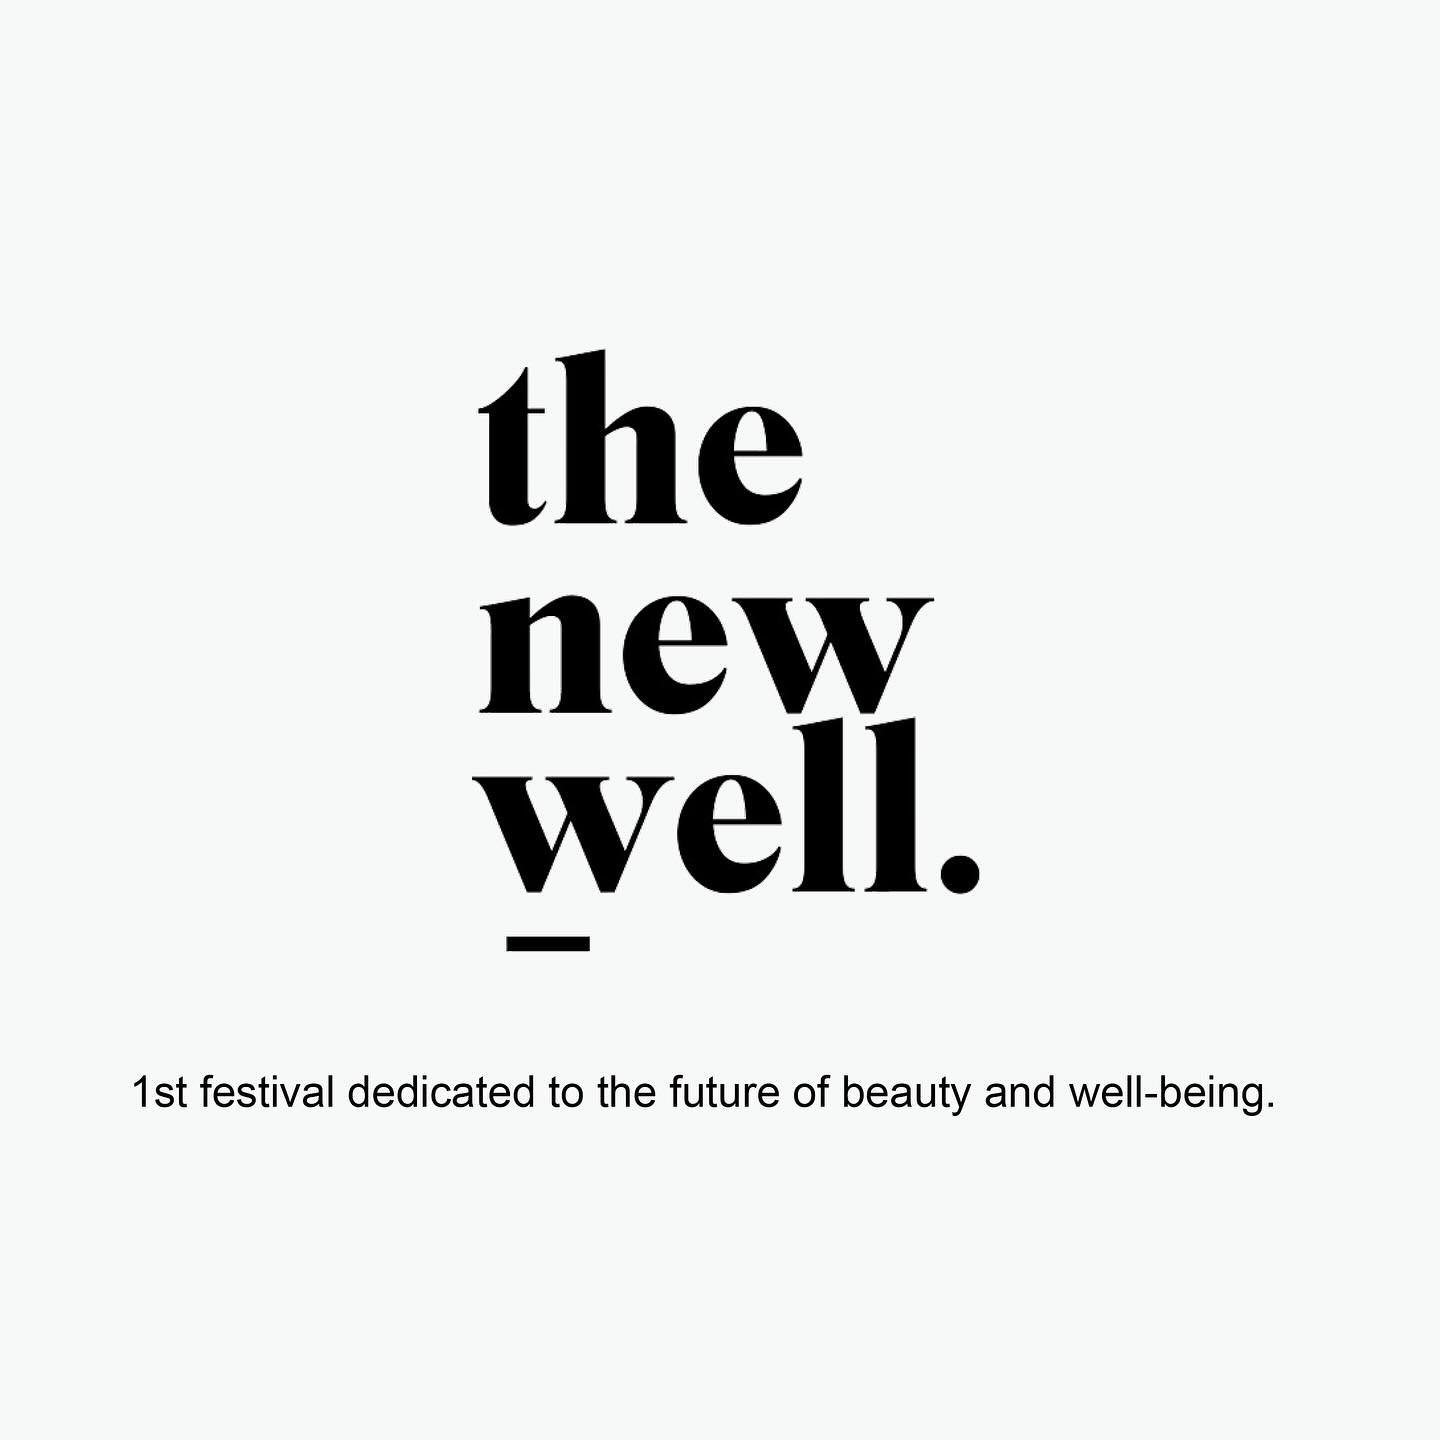 EVENT IN PARIS We will be exhibiting @thenewwell_magazine in Paris. This is the second edition of the festival created by @tiffanybuathier dedicated to the future of beauty &amp; wellbeing. Beauty, sport, well-being, food all under one roof. We look 